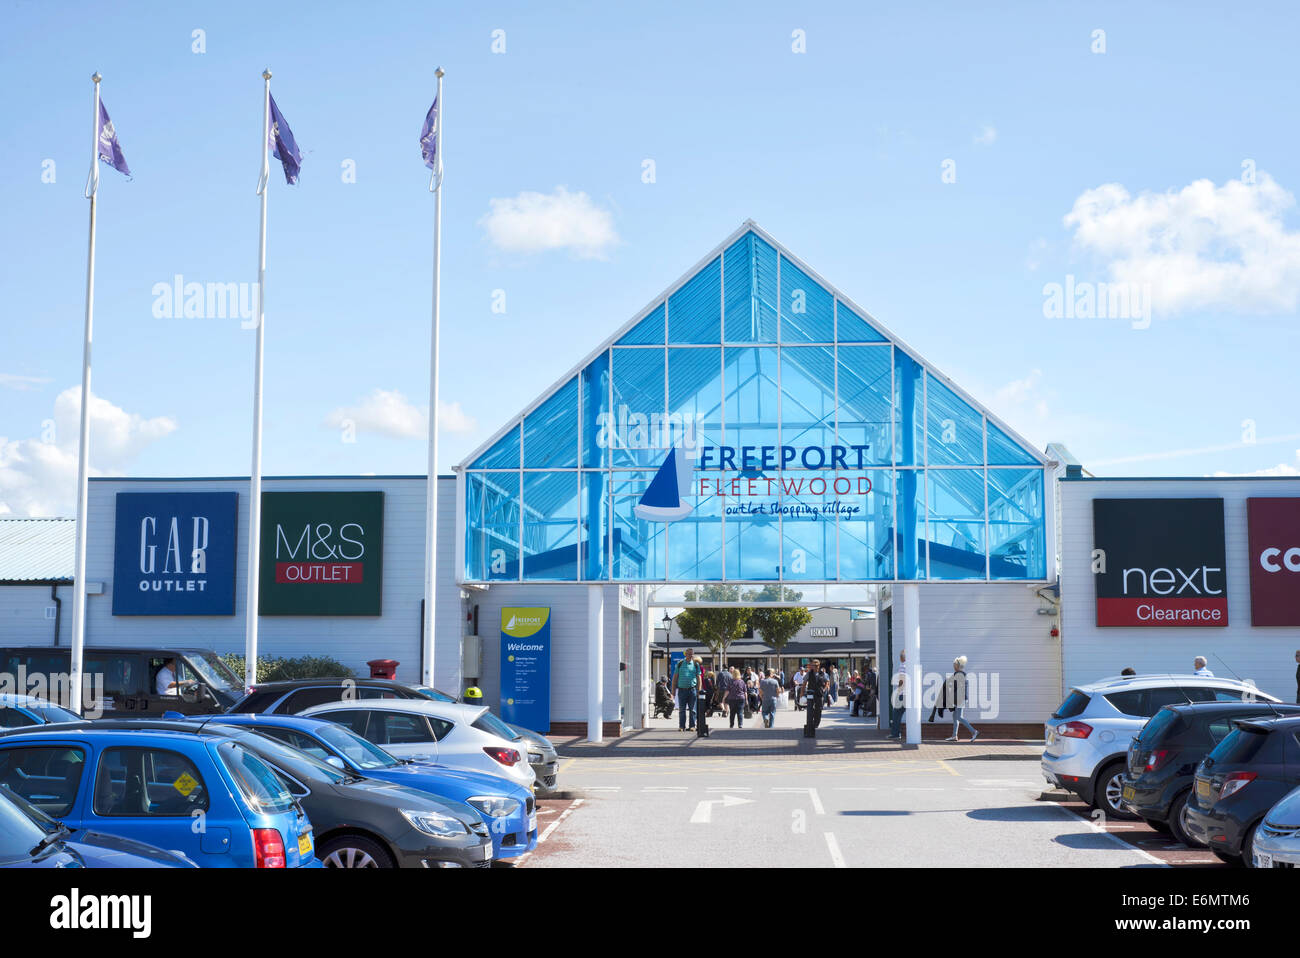 The entrance to the Fleetwood Freeport outlet shopping centre in Fleetwood, Lancashire, England Stock Photo